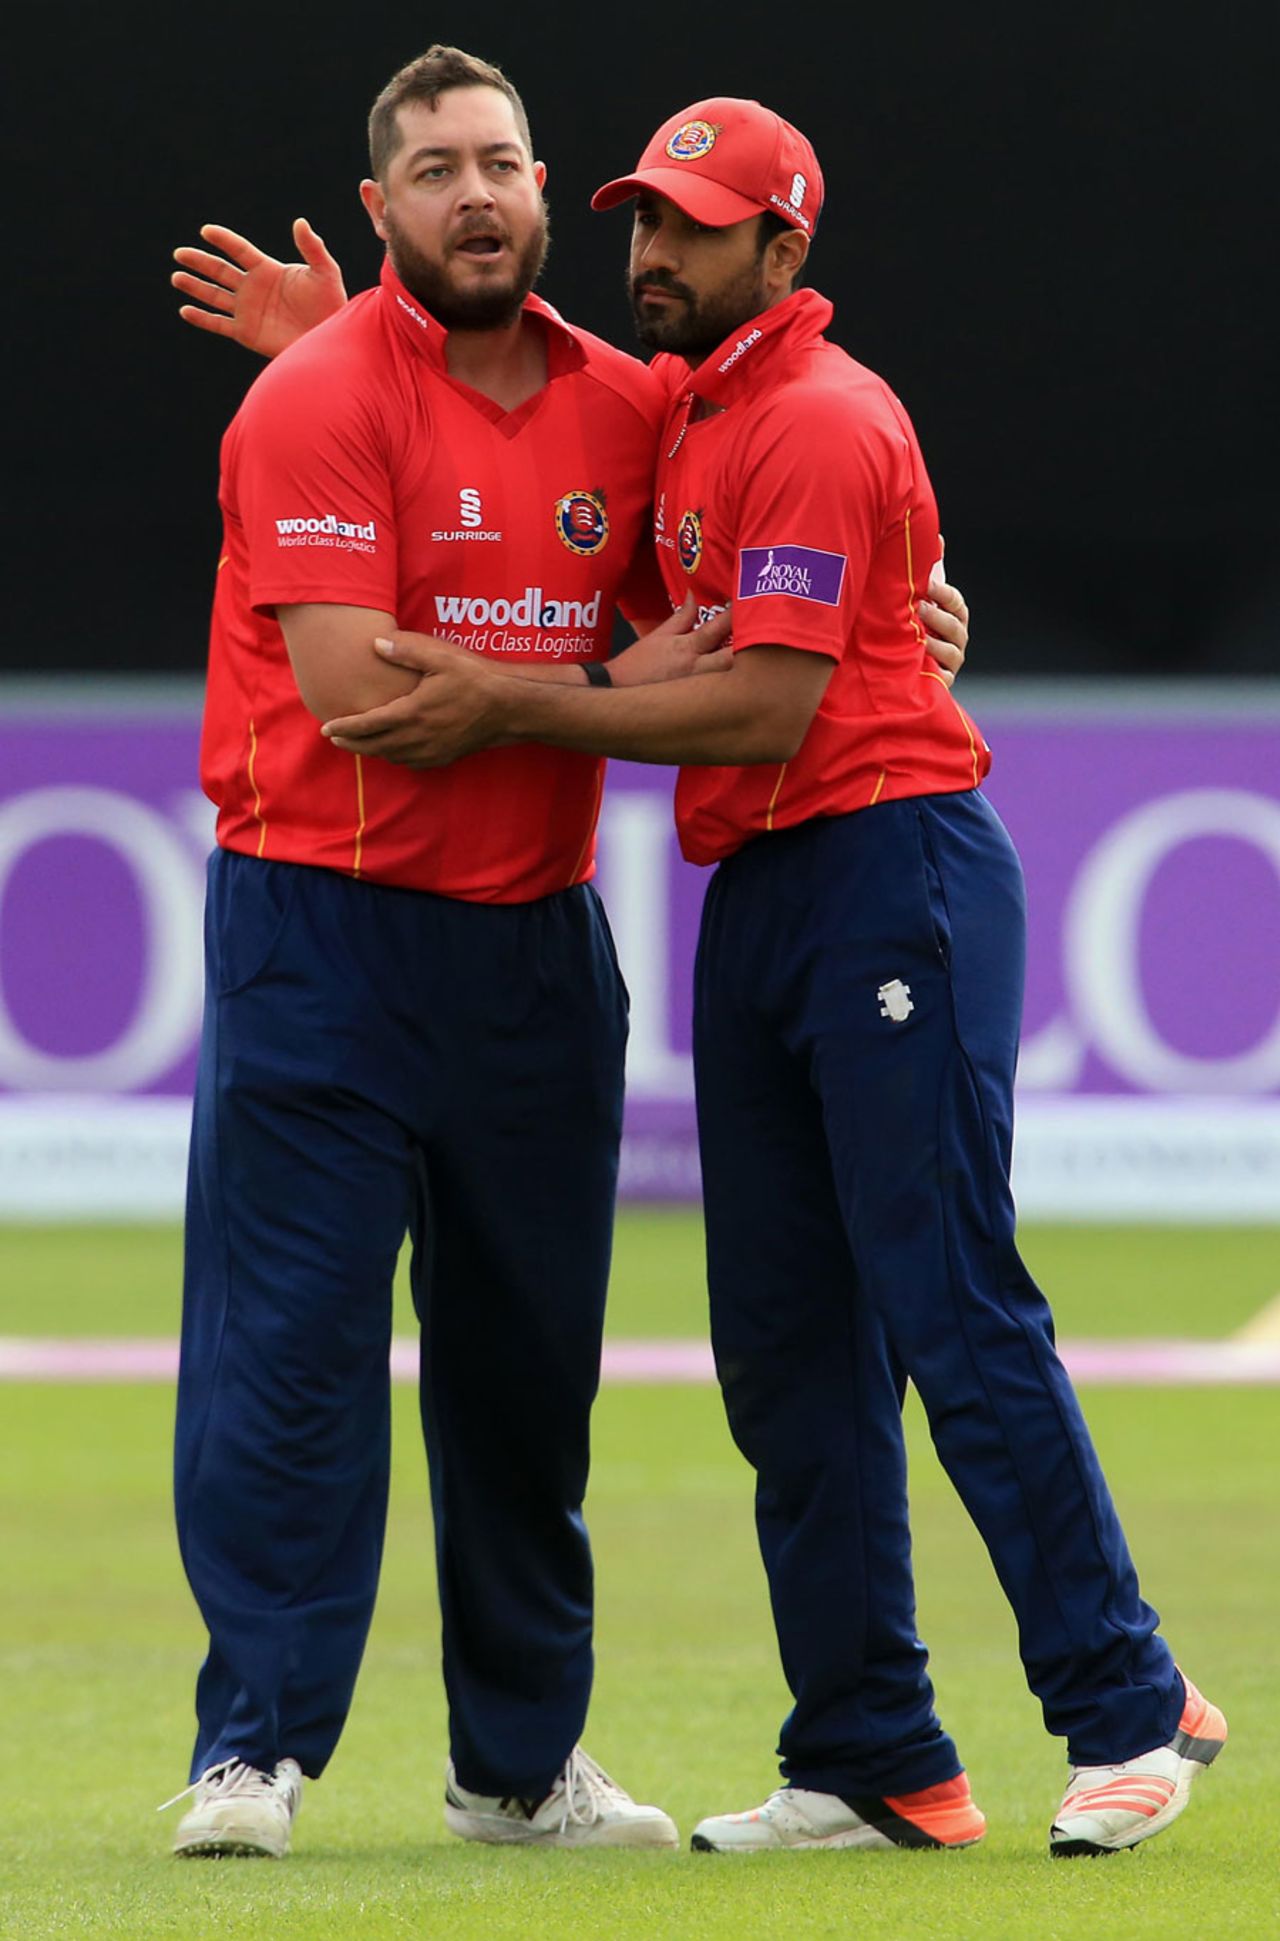 Jesse Ryder and Ravi Bopara were effective with their medium pace, Essex v Yorkshire, Royal London Cup, Quarter-final, Chelmsford, August 27, 2015